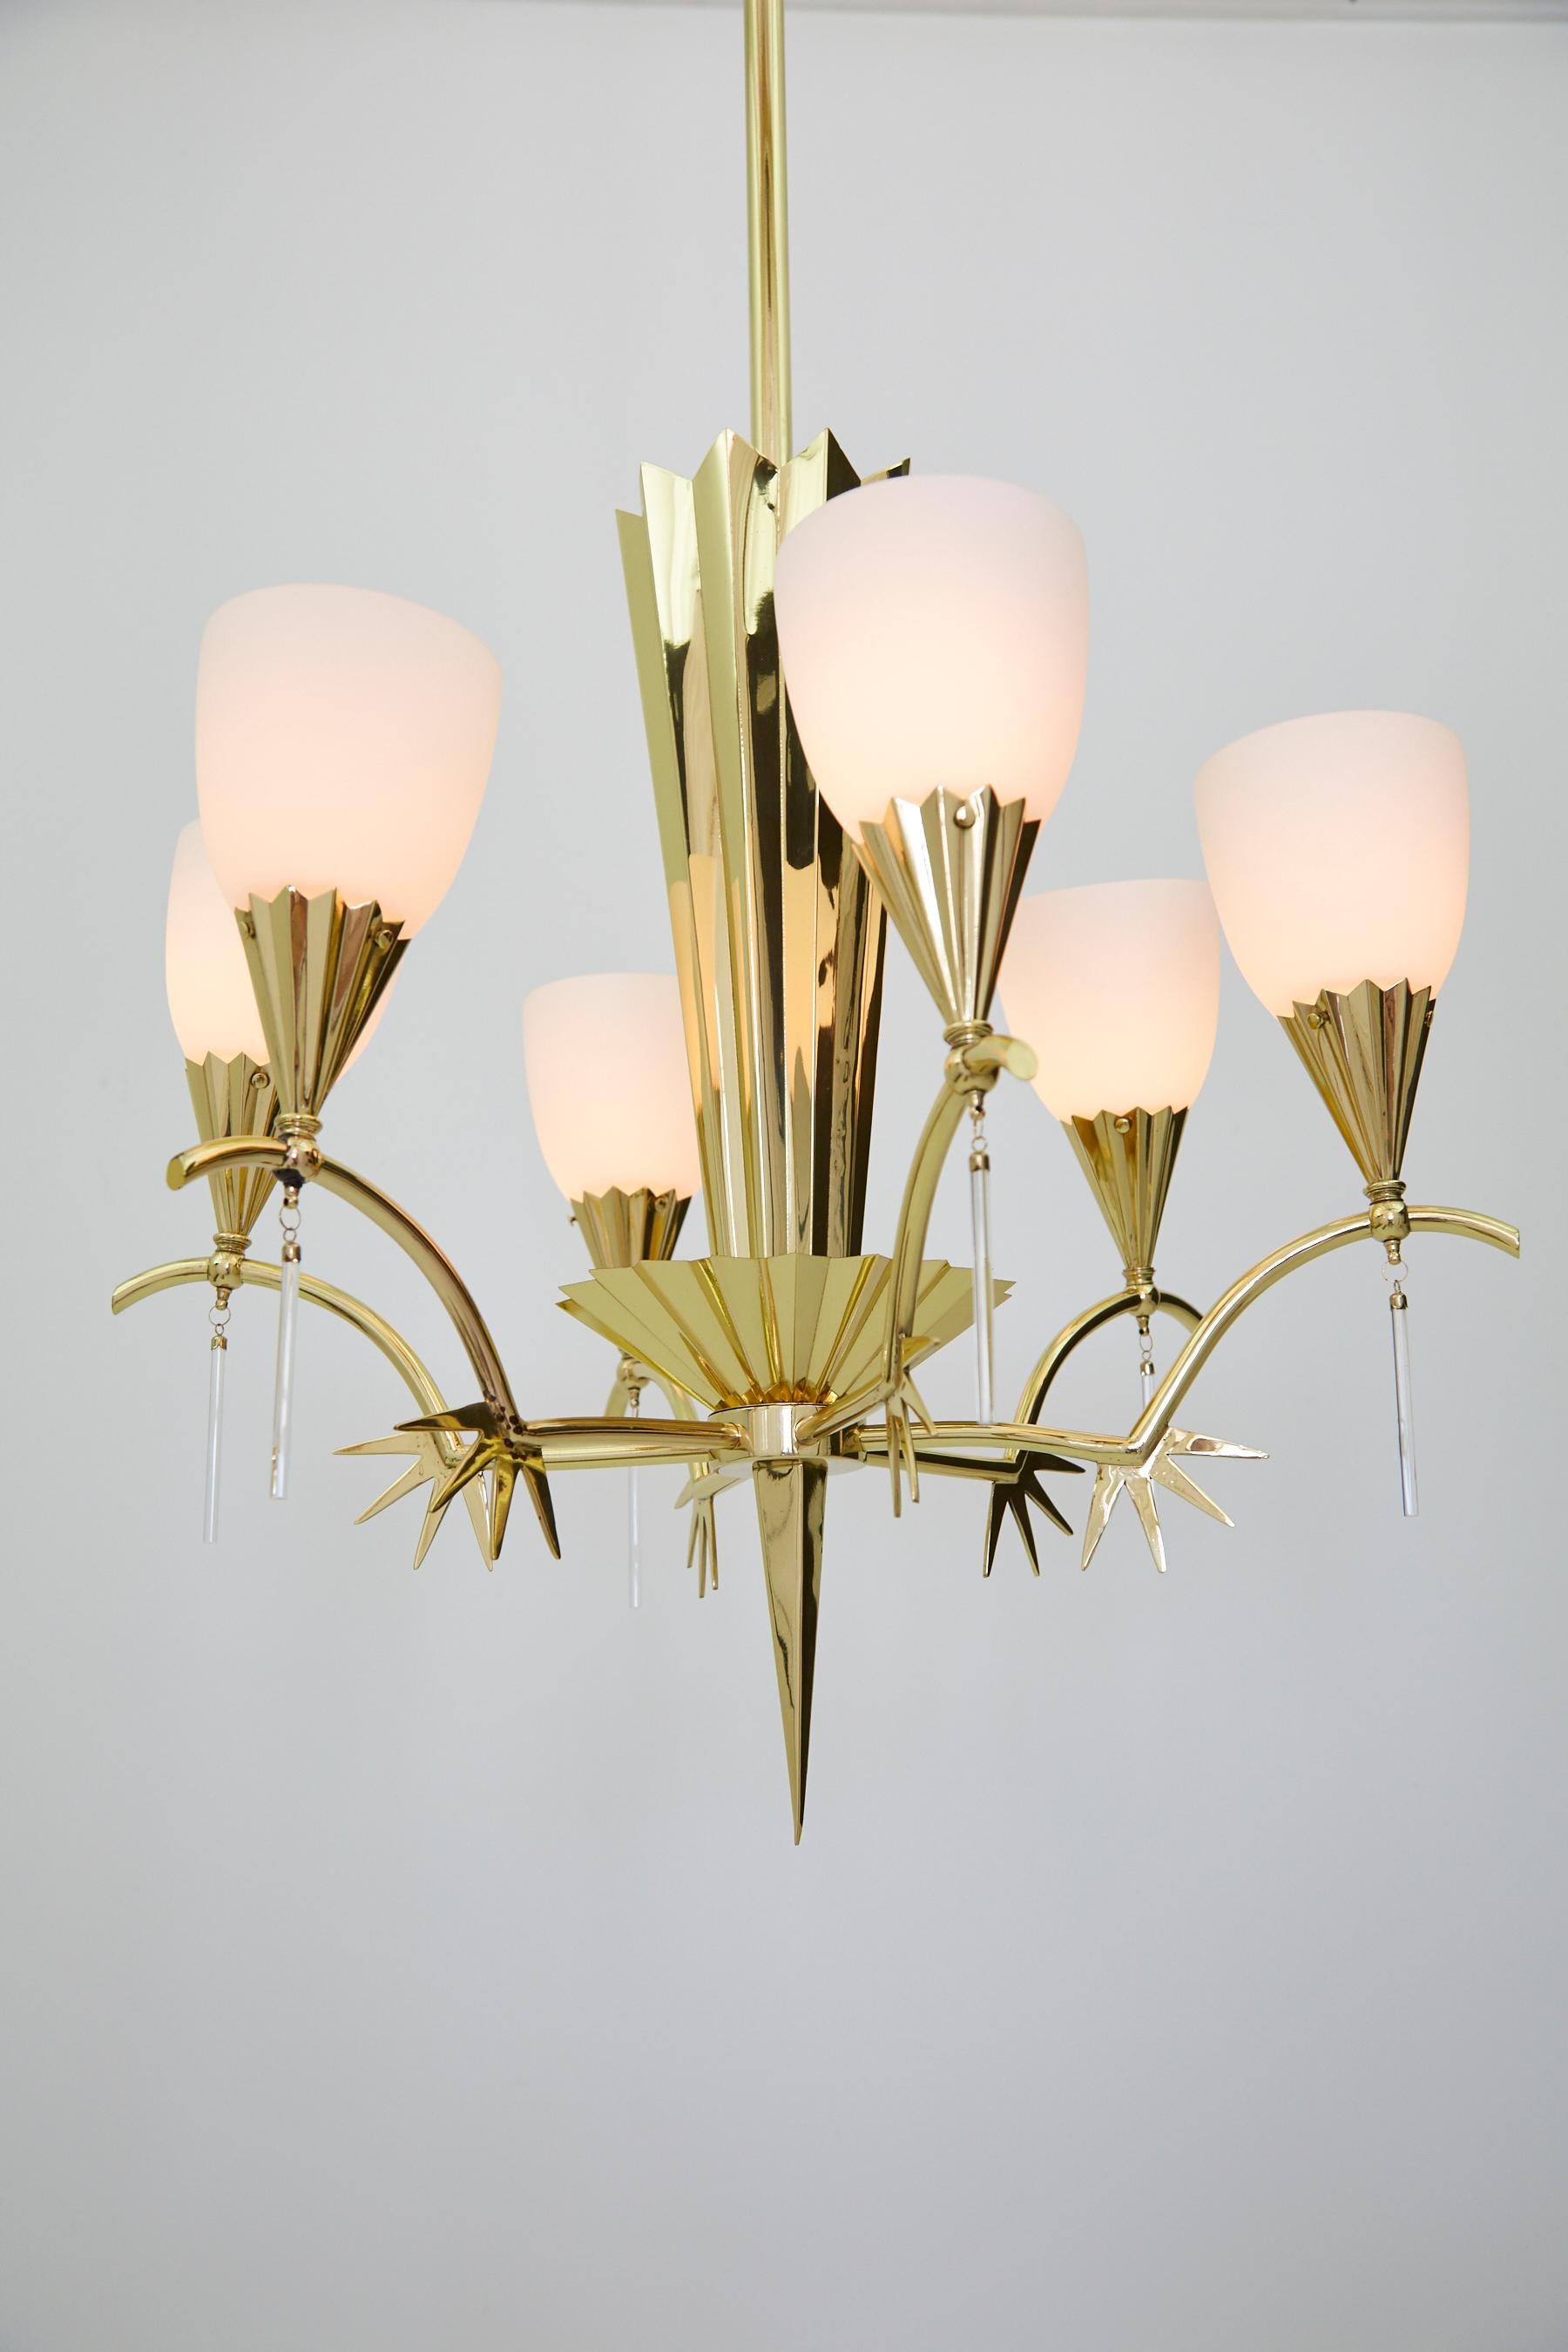 Six-Arm Italian Brass Chandelier with Decorative Spikes, 1940s For Sale 14